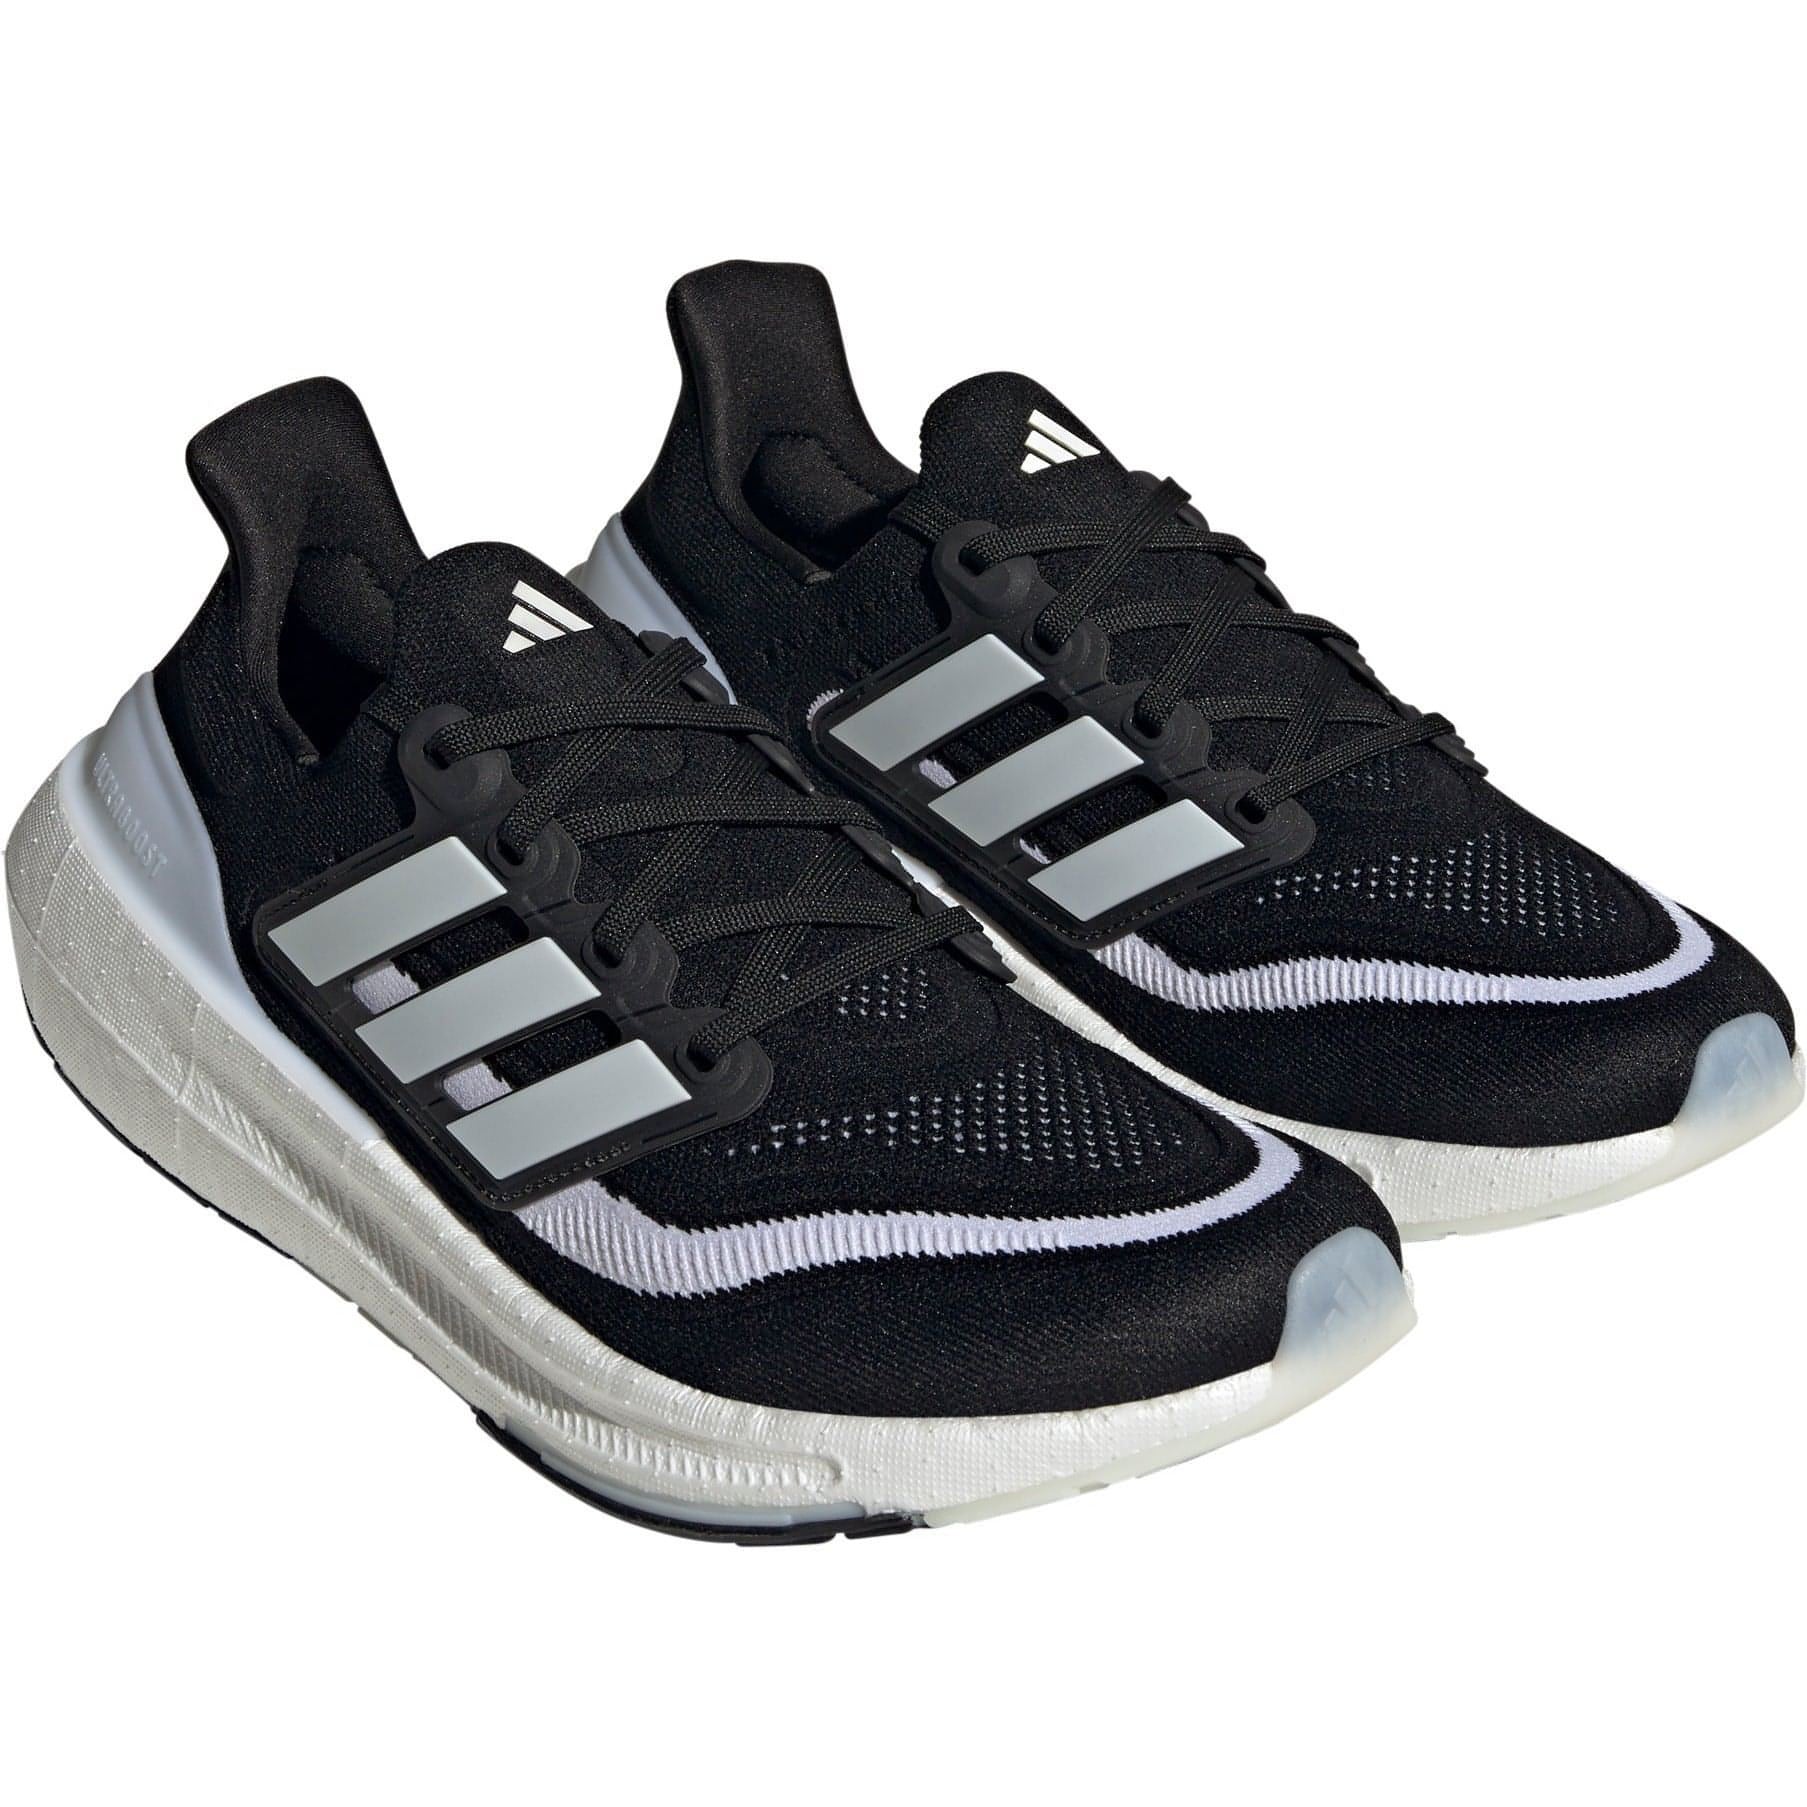 Adidas Ultra Boost Light Hq6340 Front - Front View